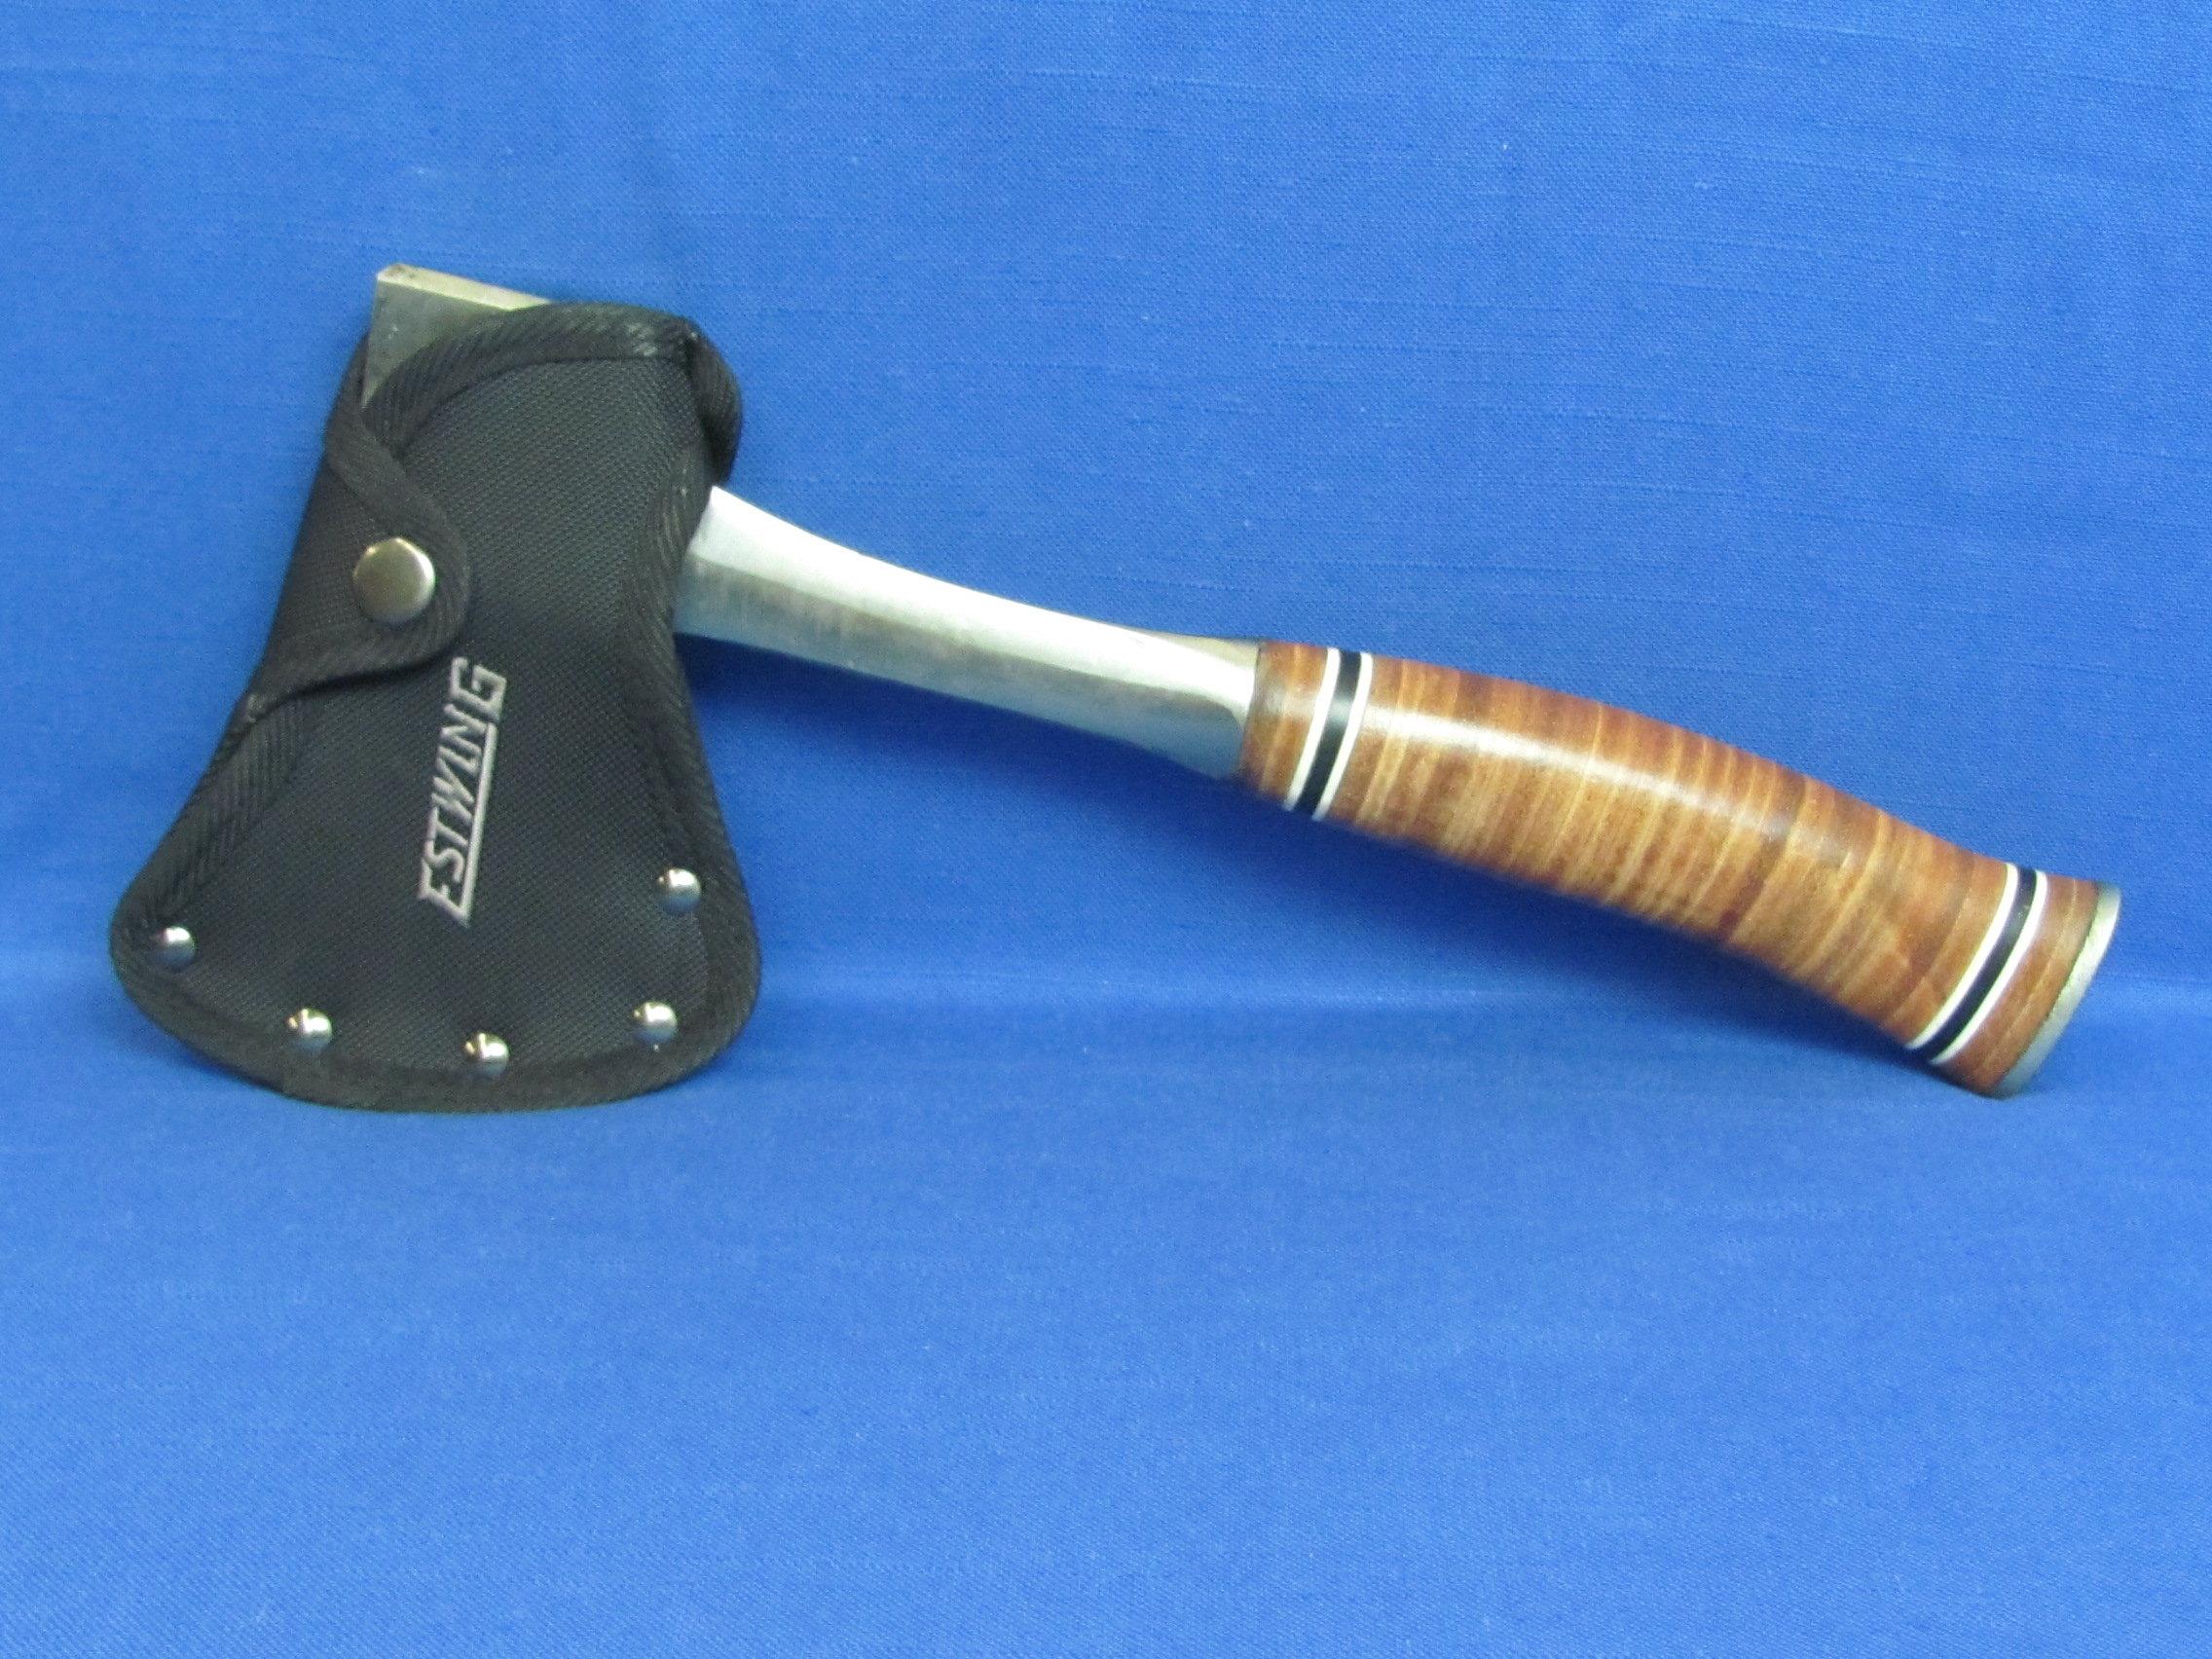 Estwing Sportsman's Camping Hatchet with Canvas Sheath – 13” long – Made in USA